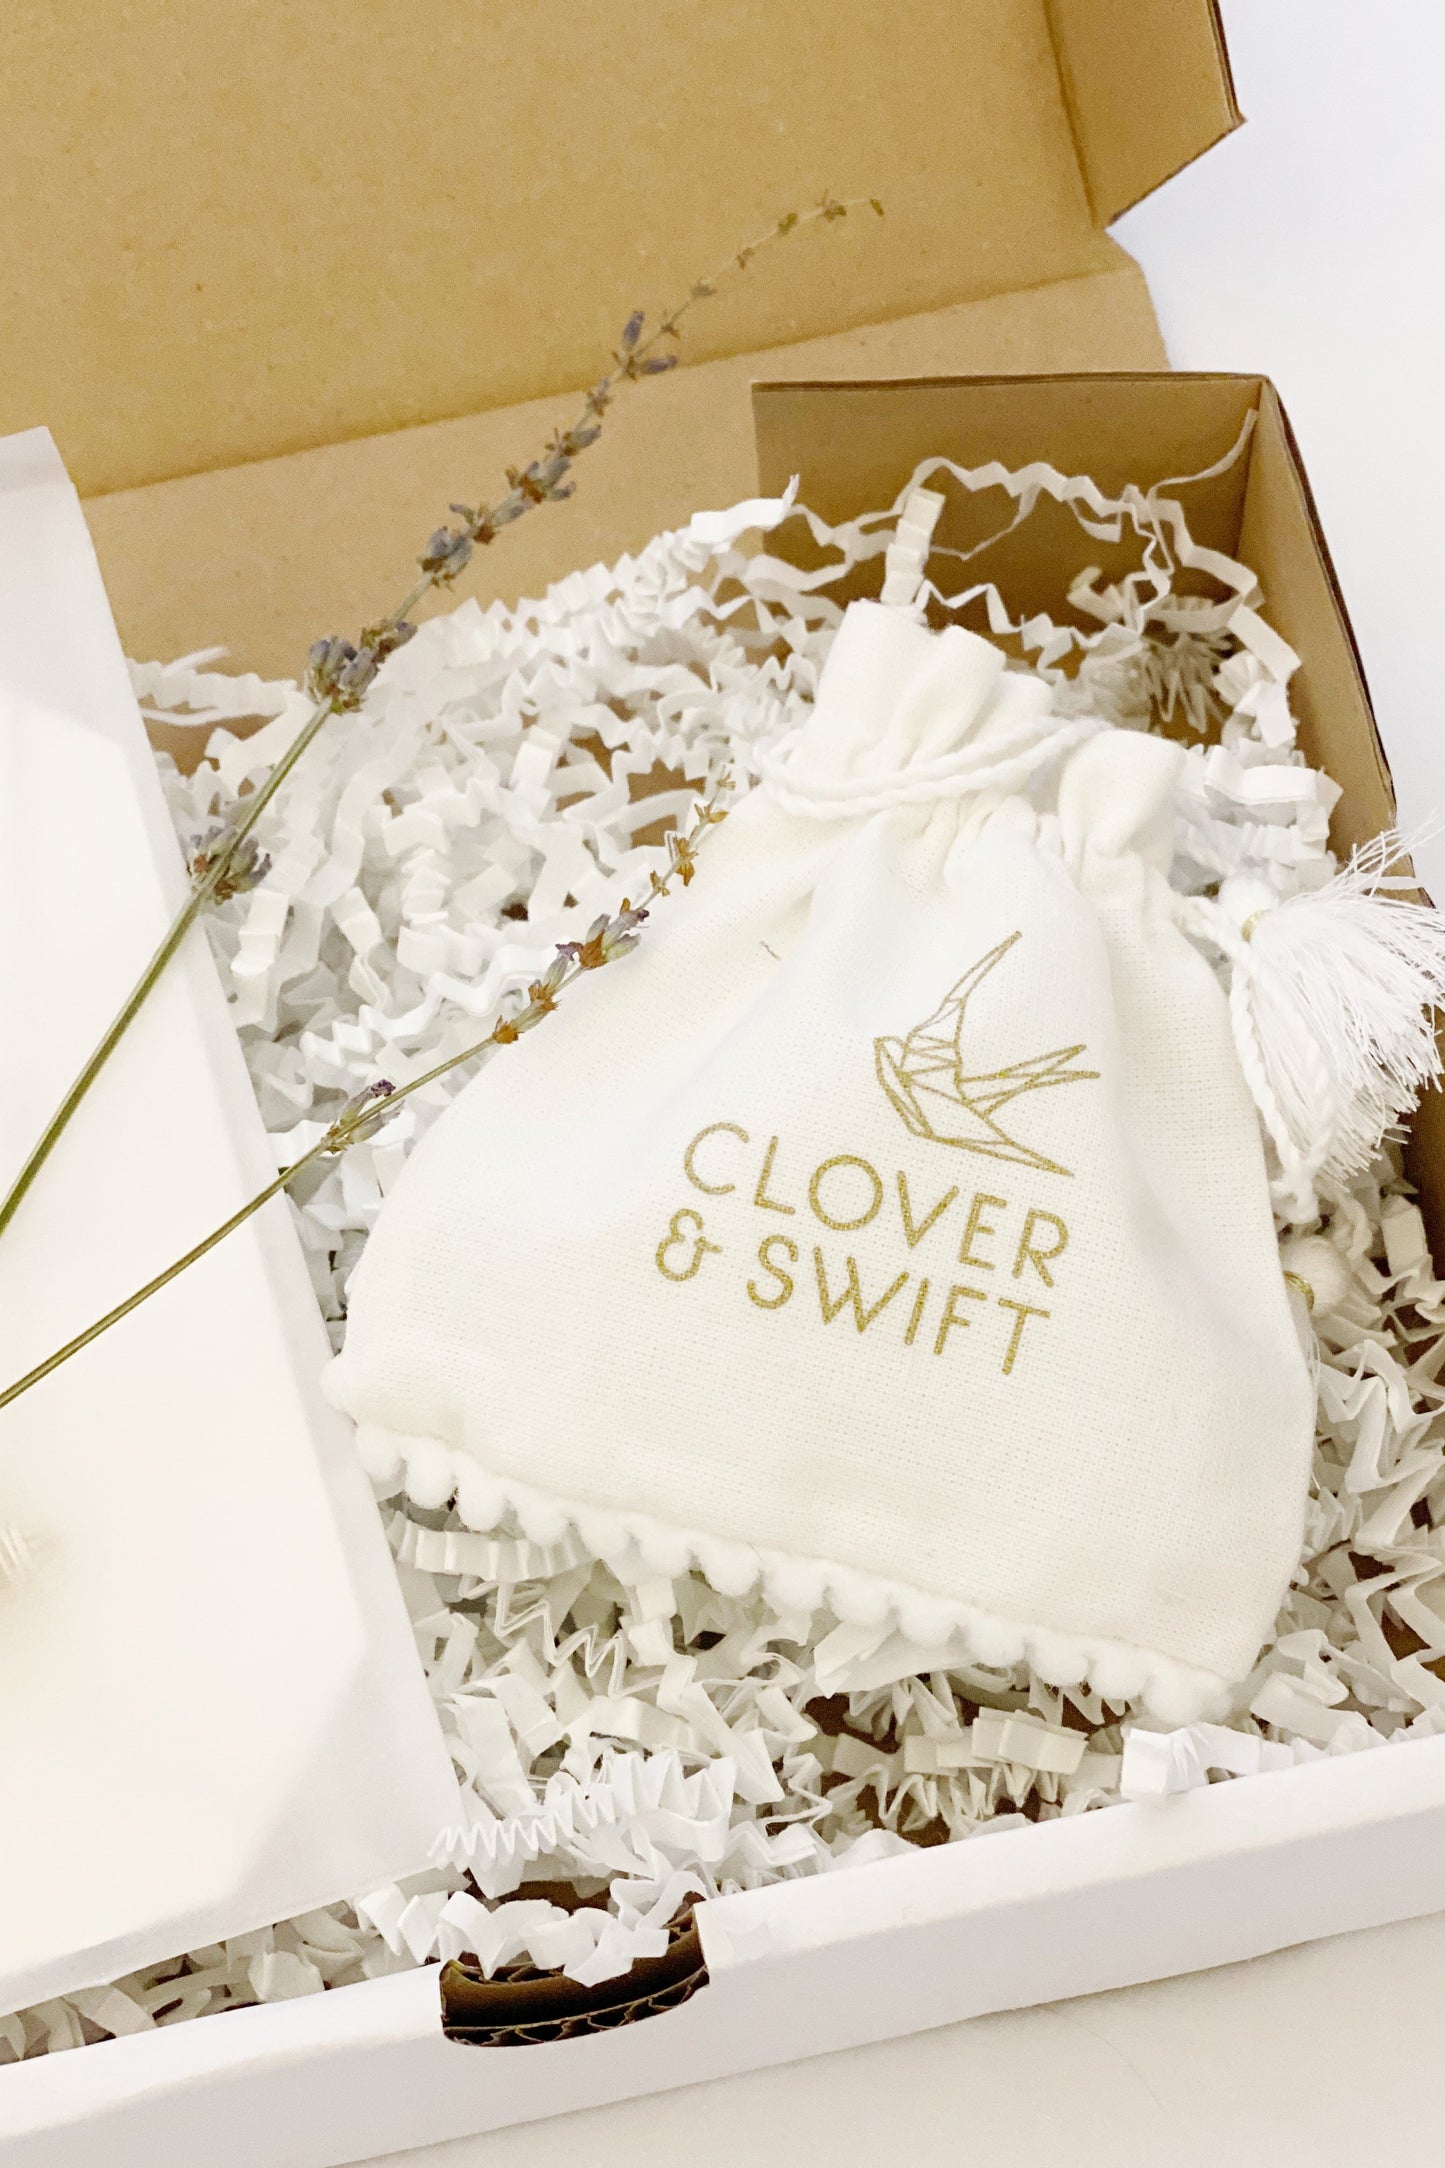 Small white drawstring pouch with Clover & Swift printed on it in a box